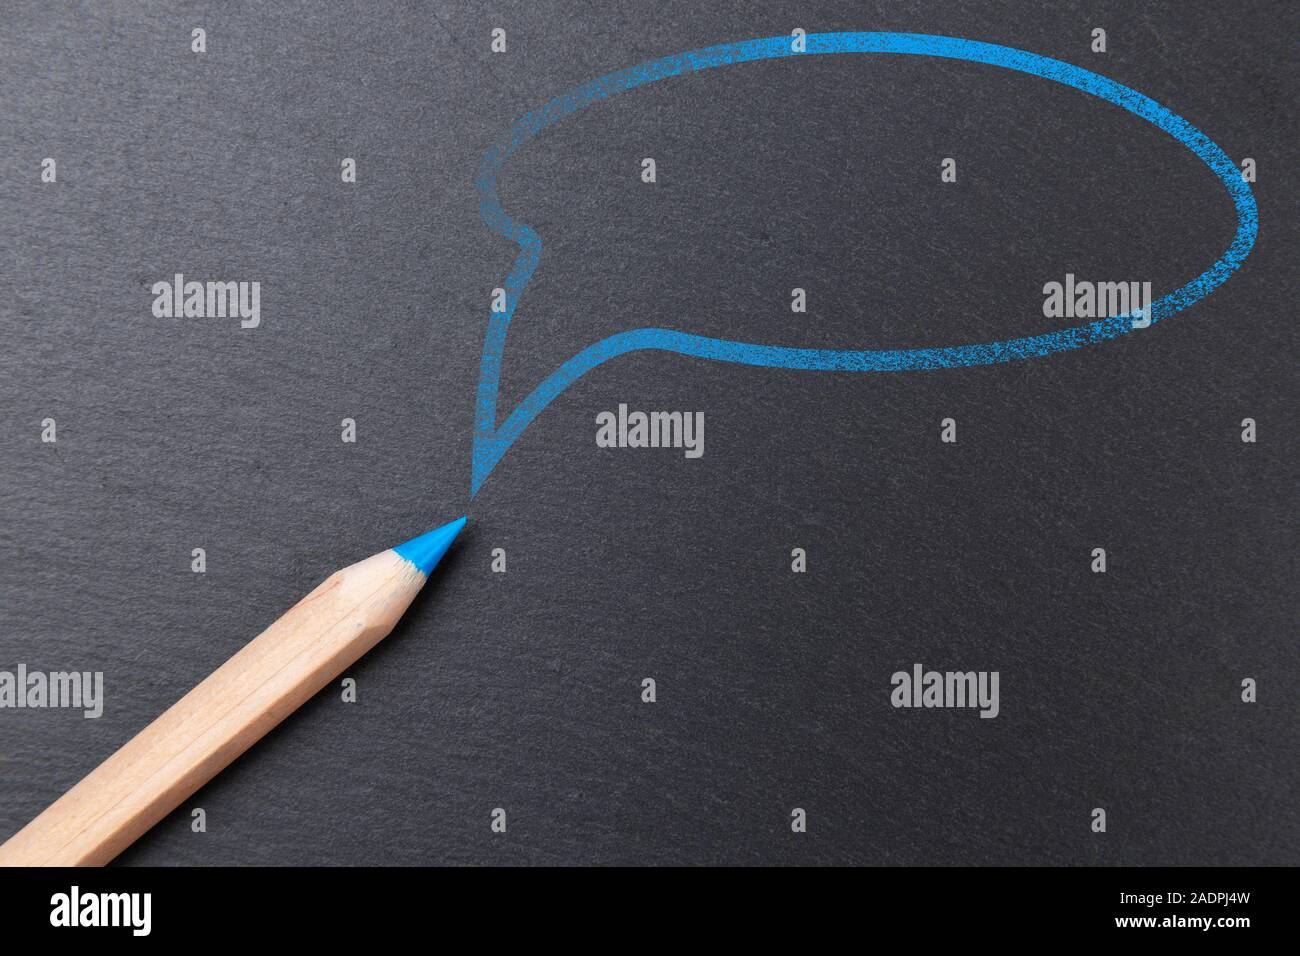 Blue color pencil with blue speech bubble above it, on chalkboard background, copy space Stock Photo